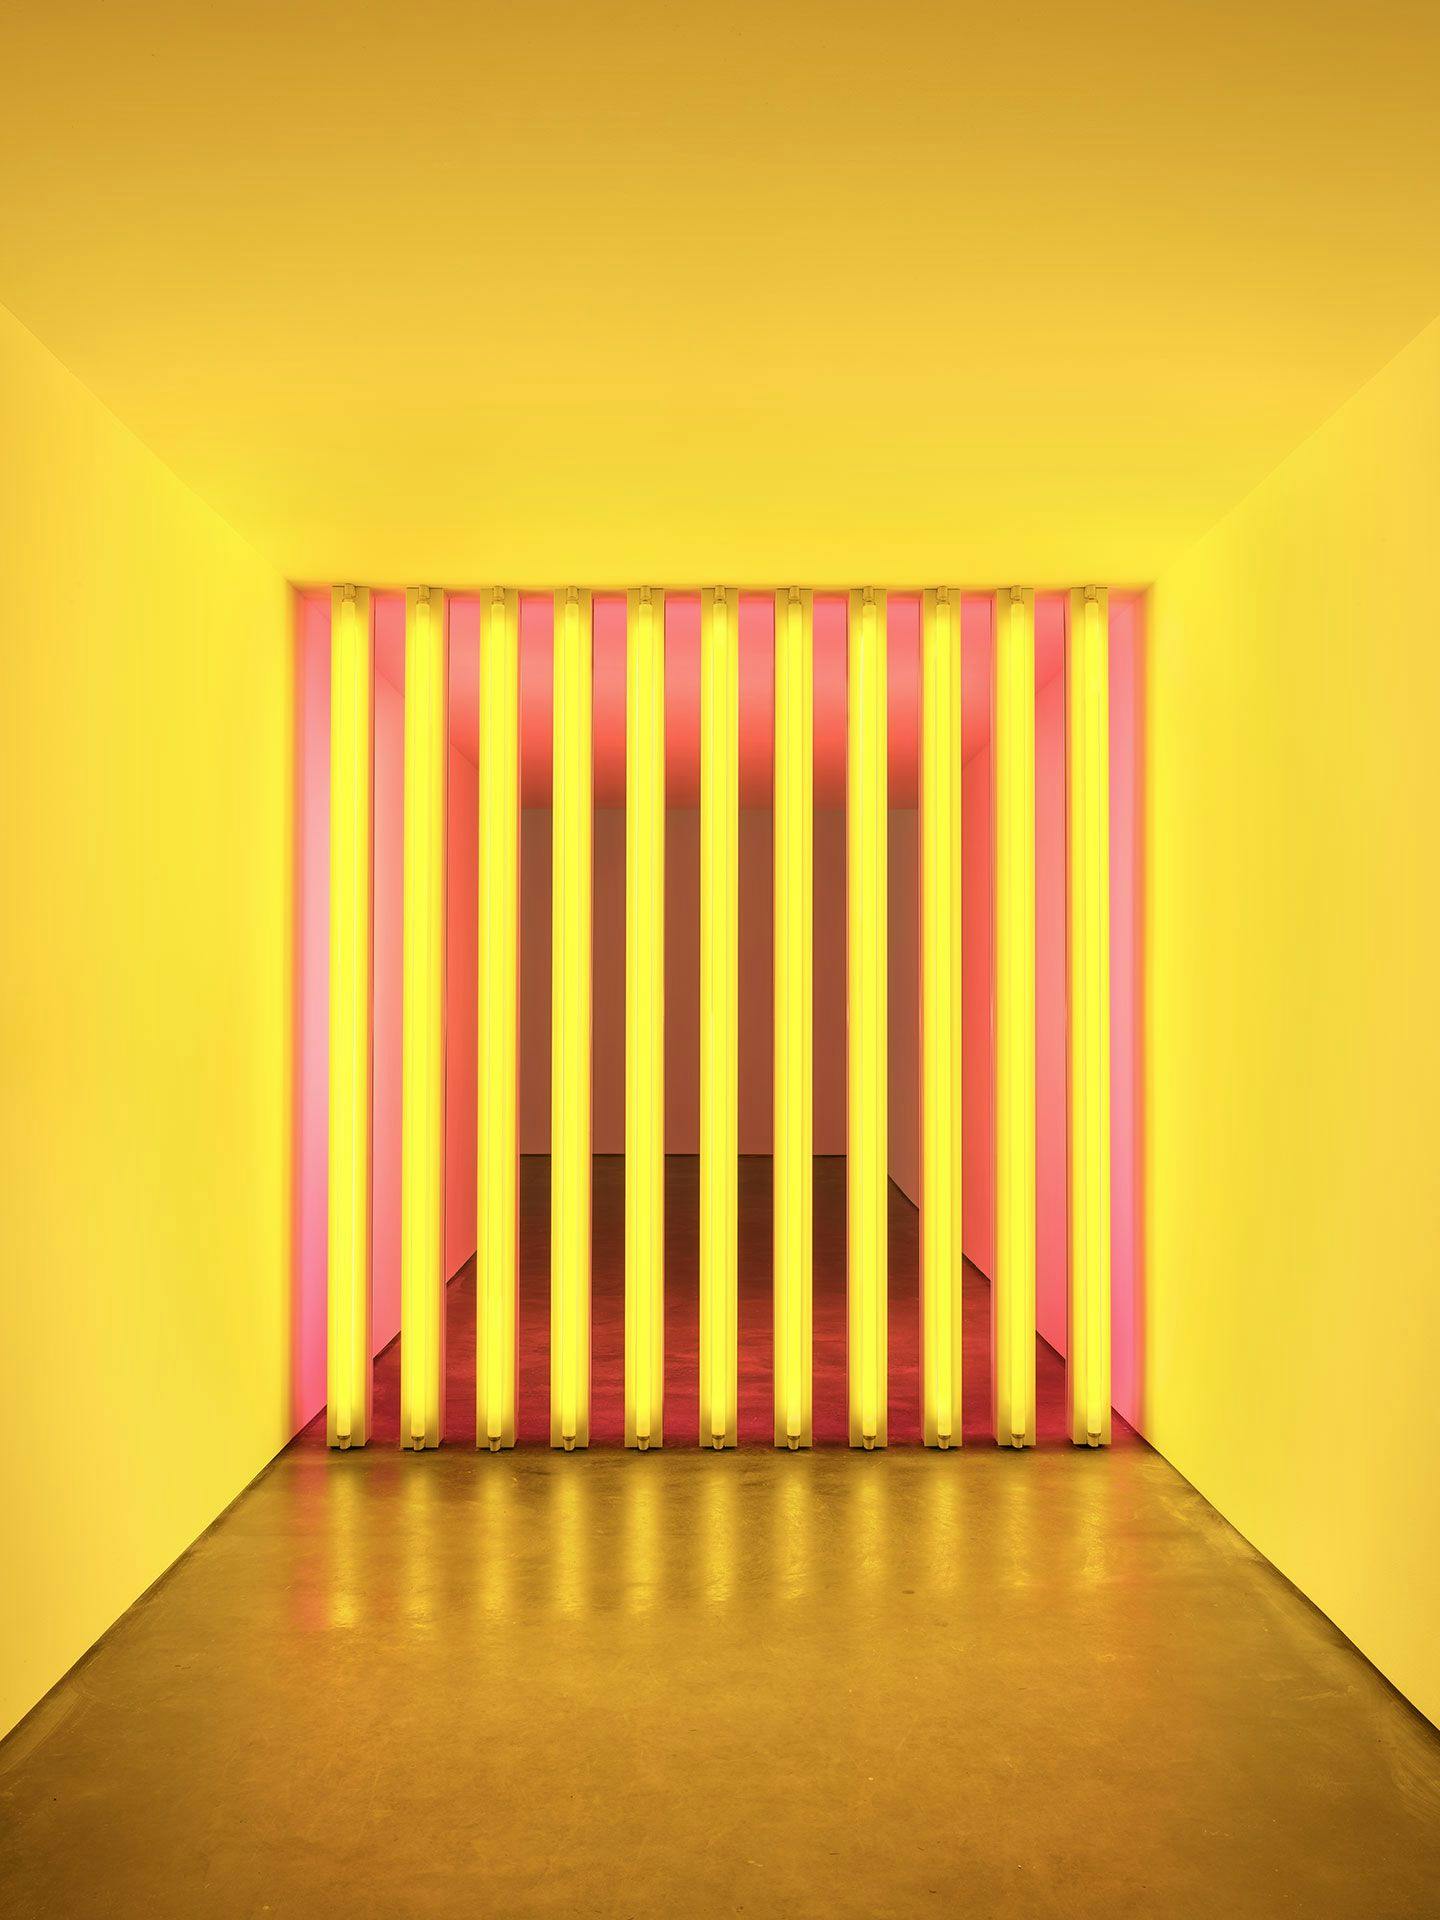 A mid-corridor sculpture in yellow and pink fluorescent light by Dan Flavin, titled untitled (to Barry, Mike, Chuck and Leonard), dated 1972 to 1975.